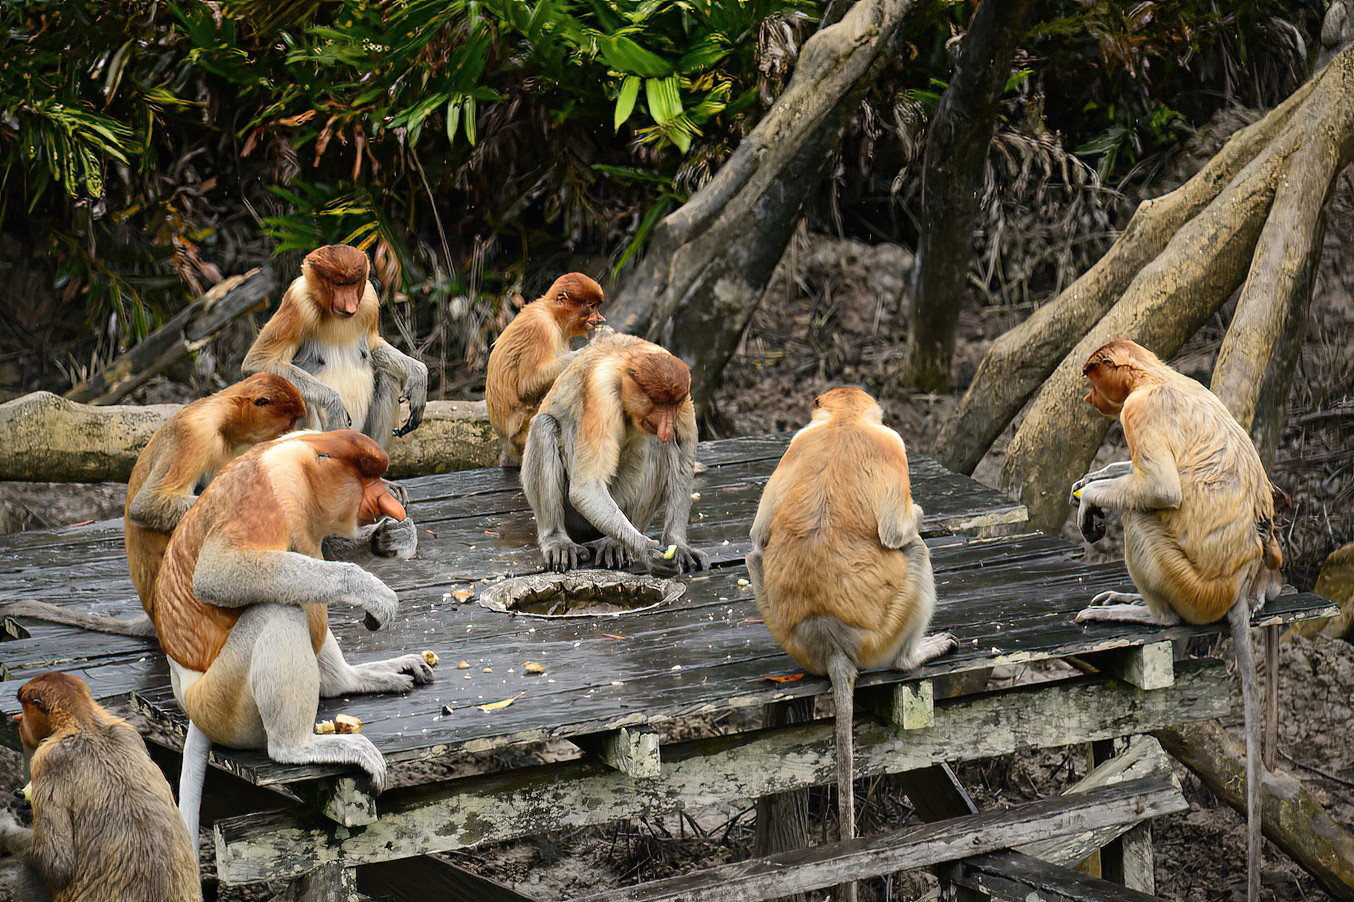 The monkeys are wild, but choose to hang around the centre where they are fed occasionally.